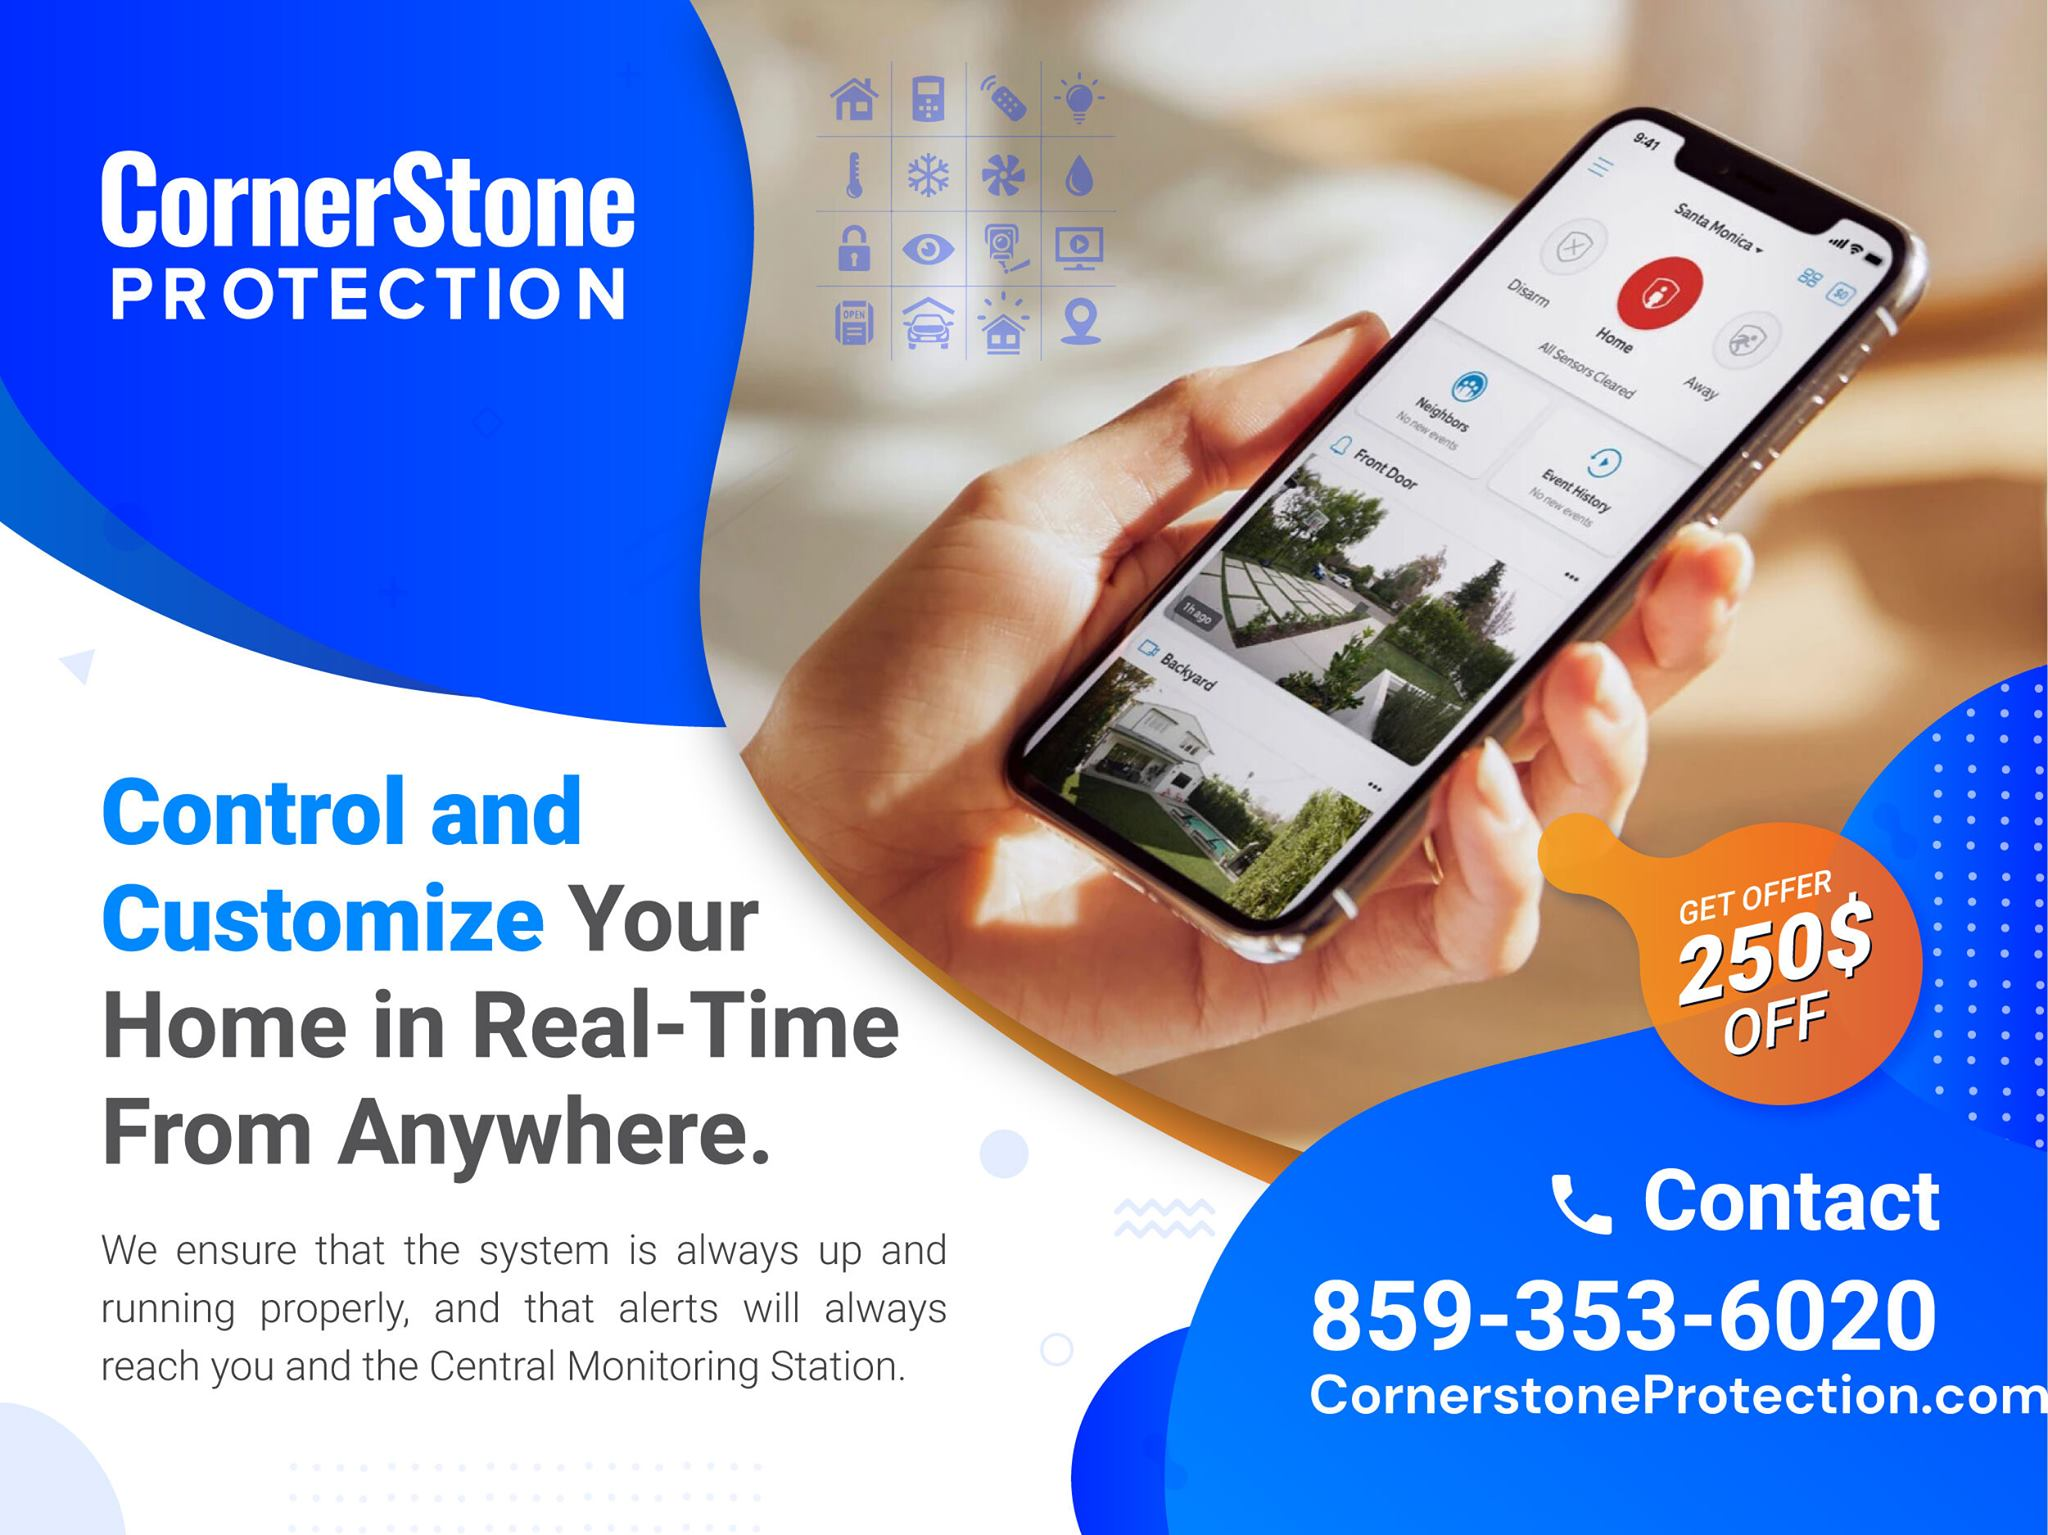 home automation systems from cornerstone protection'